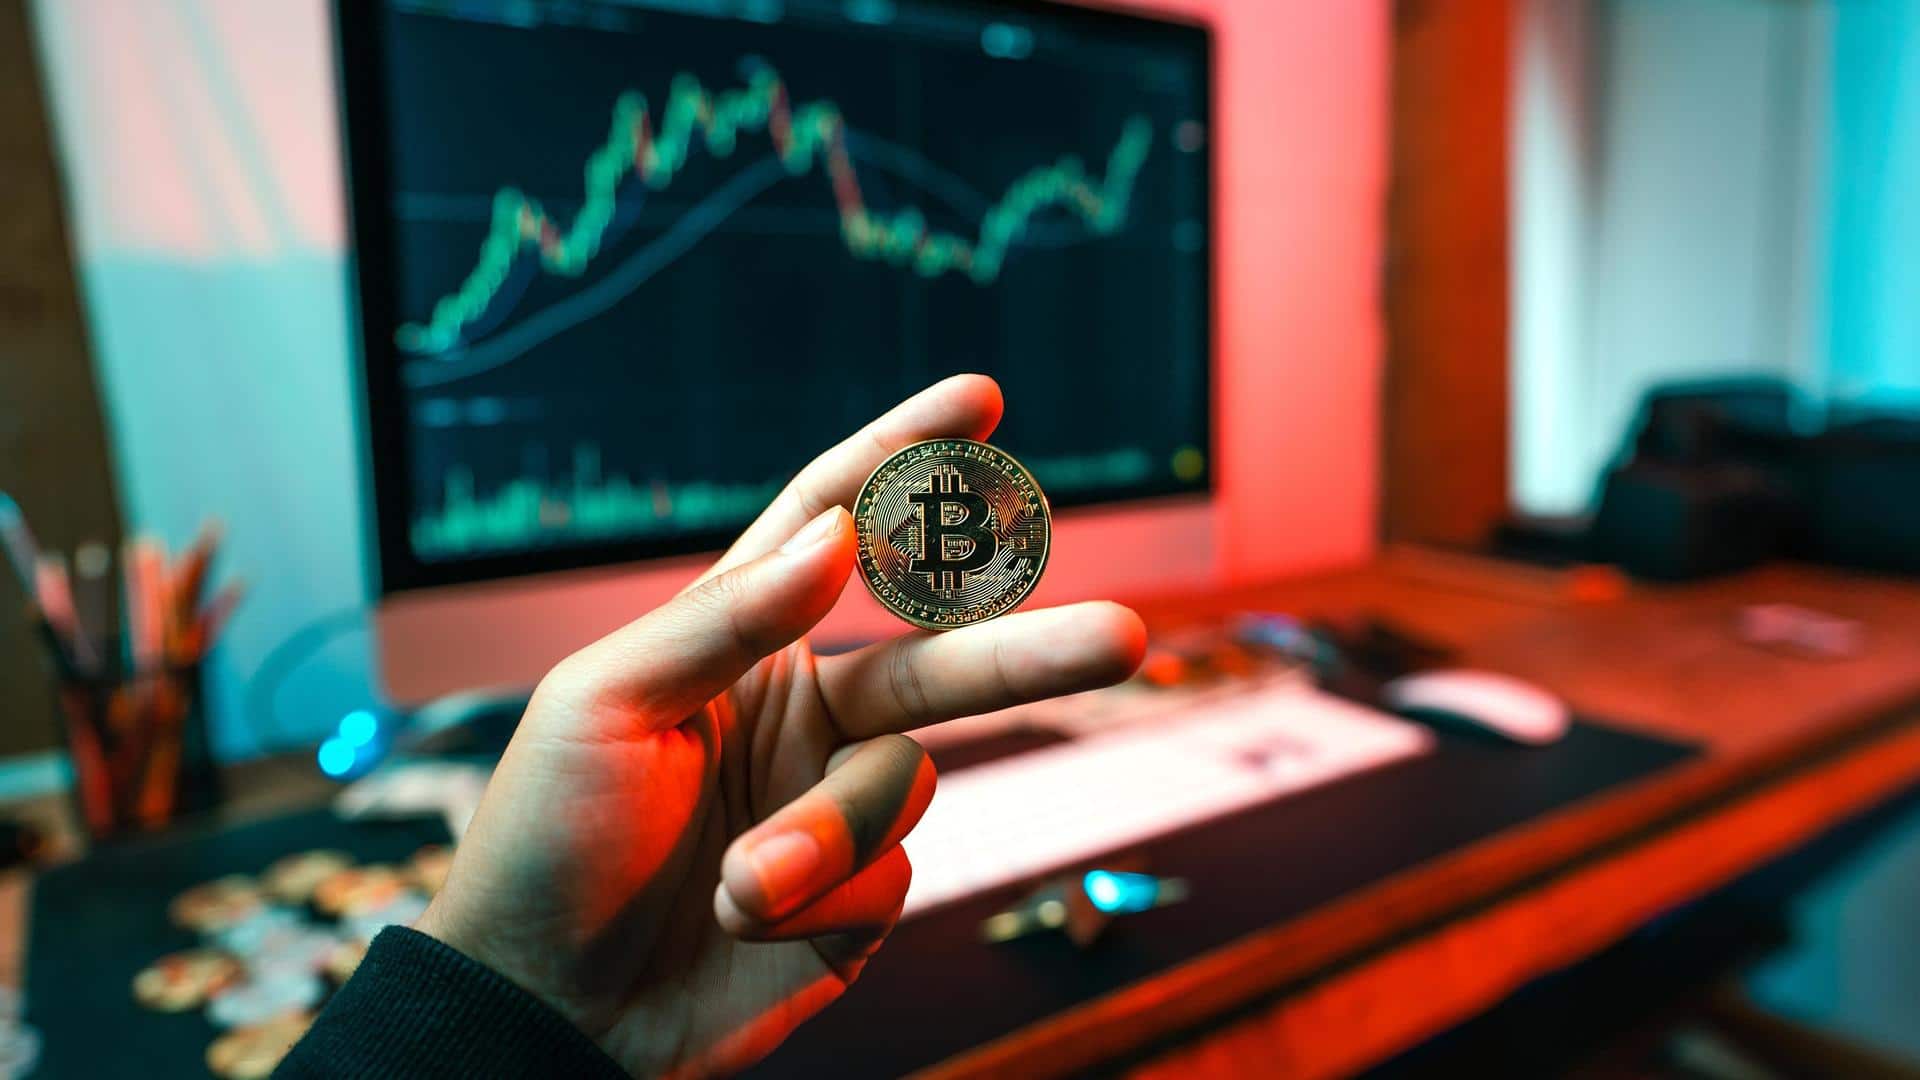 Cryptocurrency prices: Here are rates of Bitcoin, Ethereum, XRP, BNB